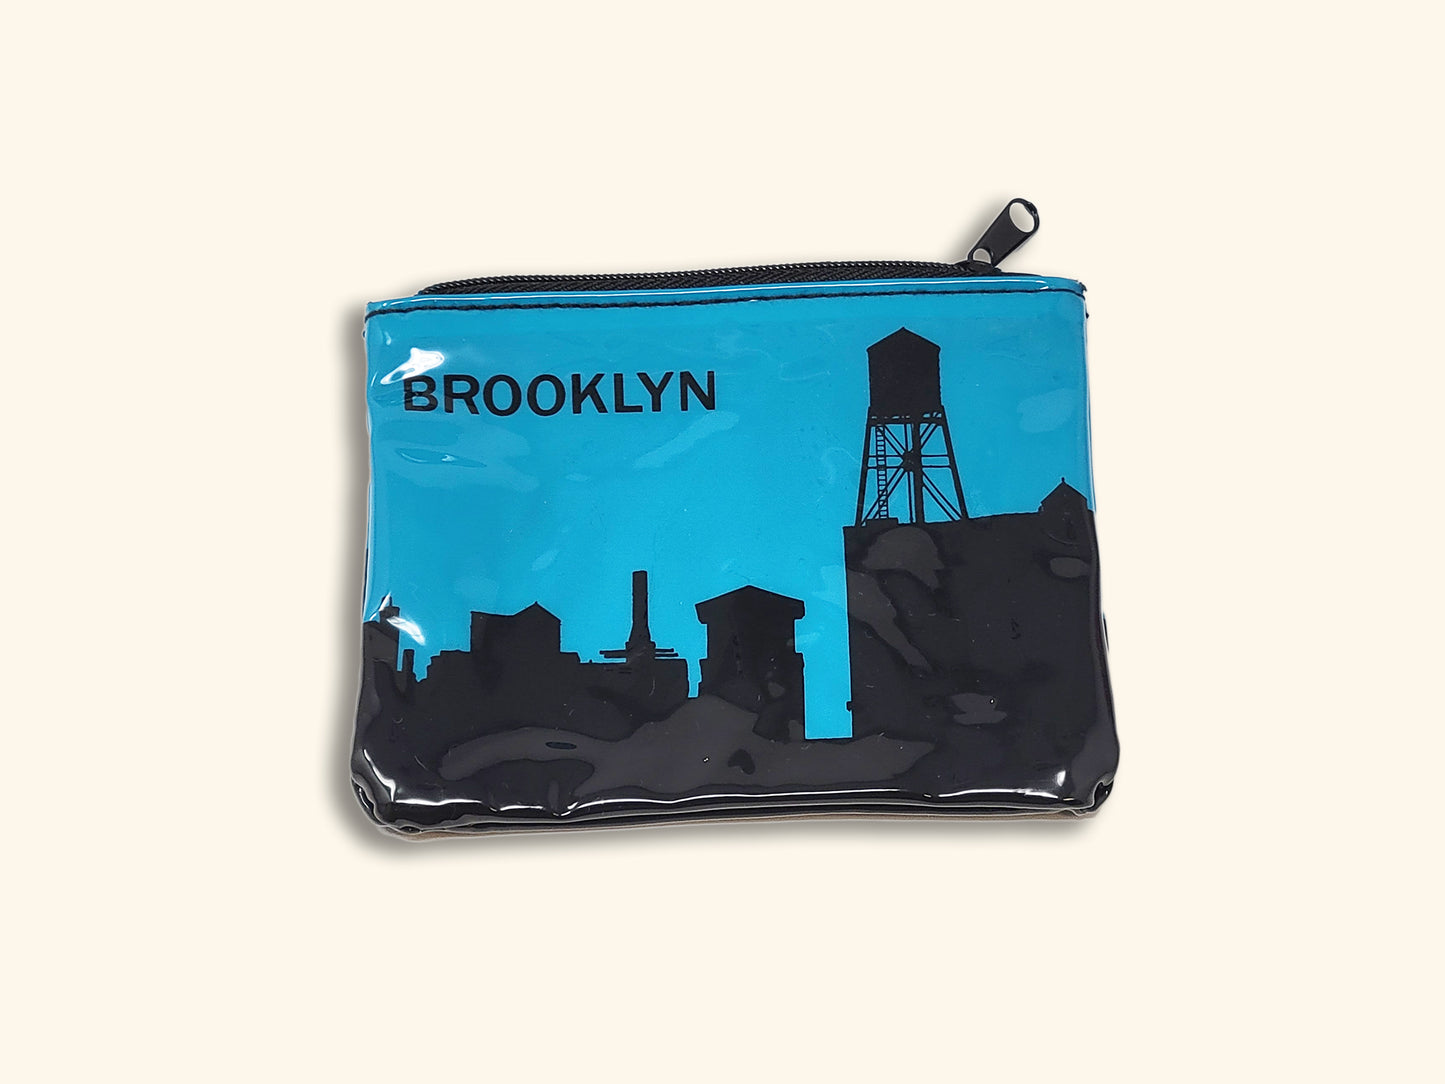 Brooklyn Water Tower Cosmetic Case & Coin Purse